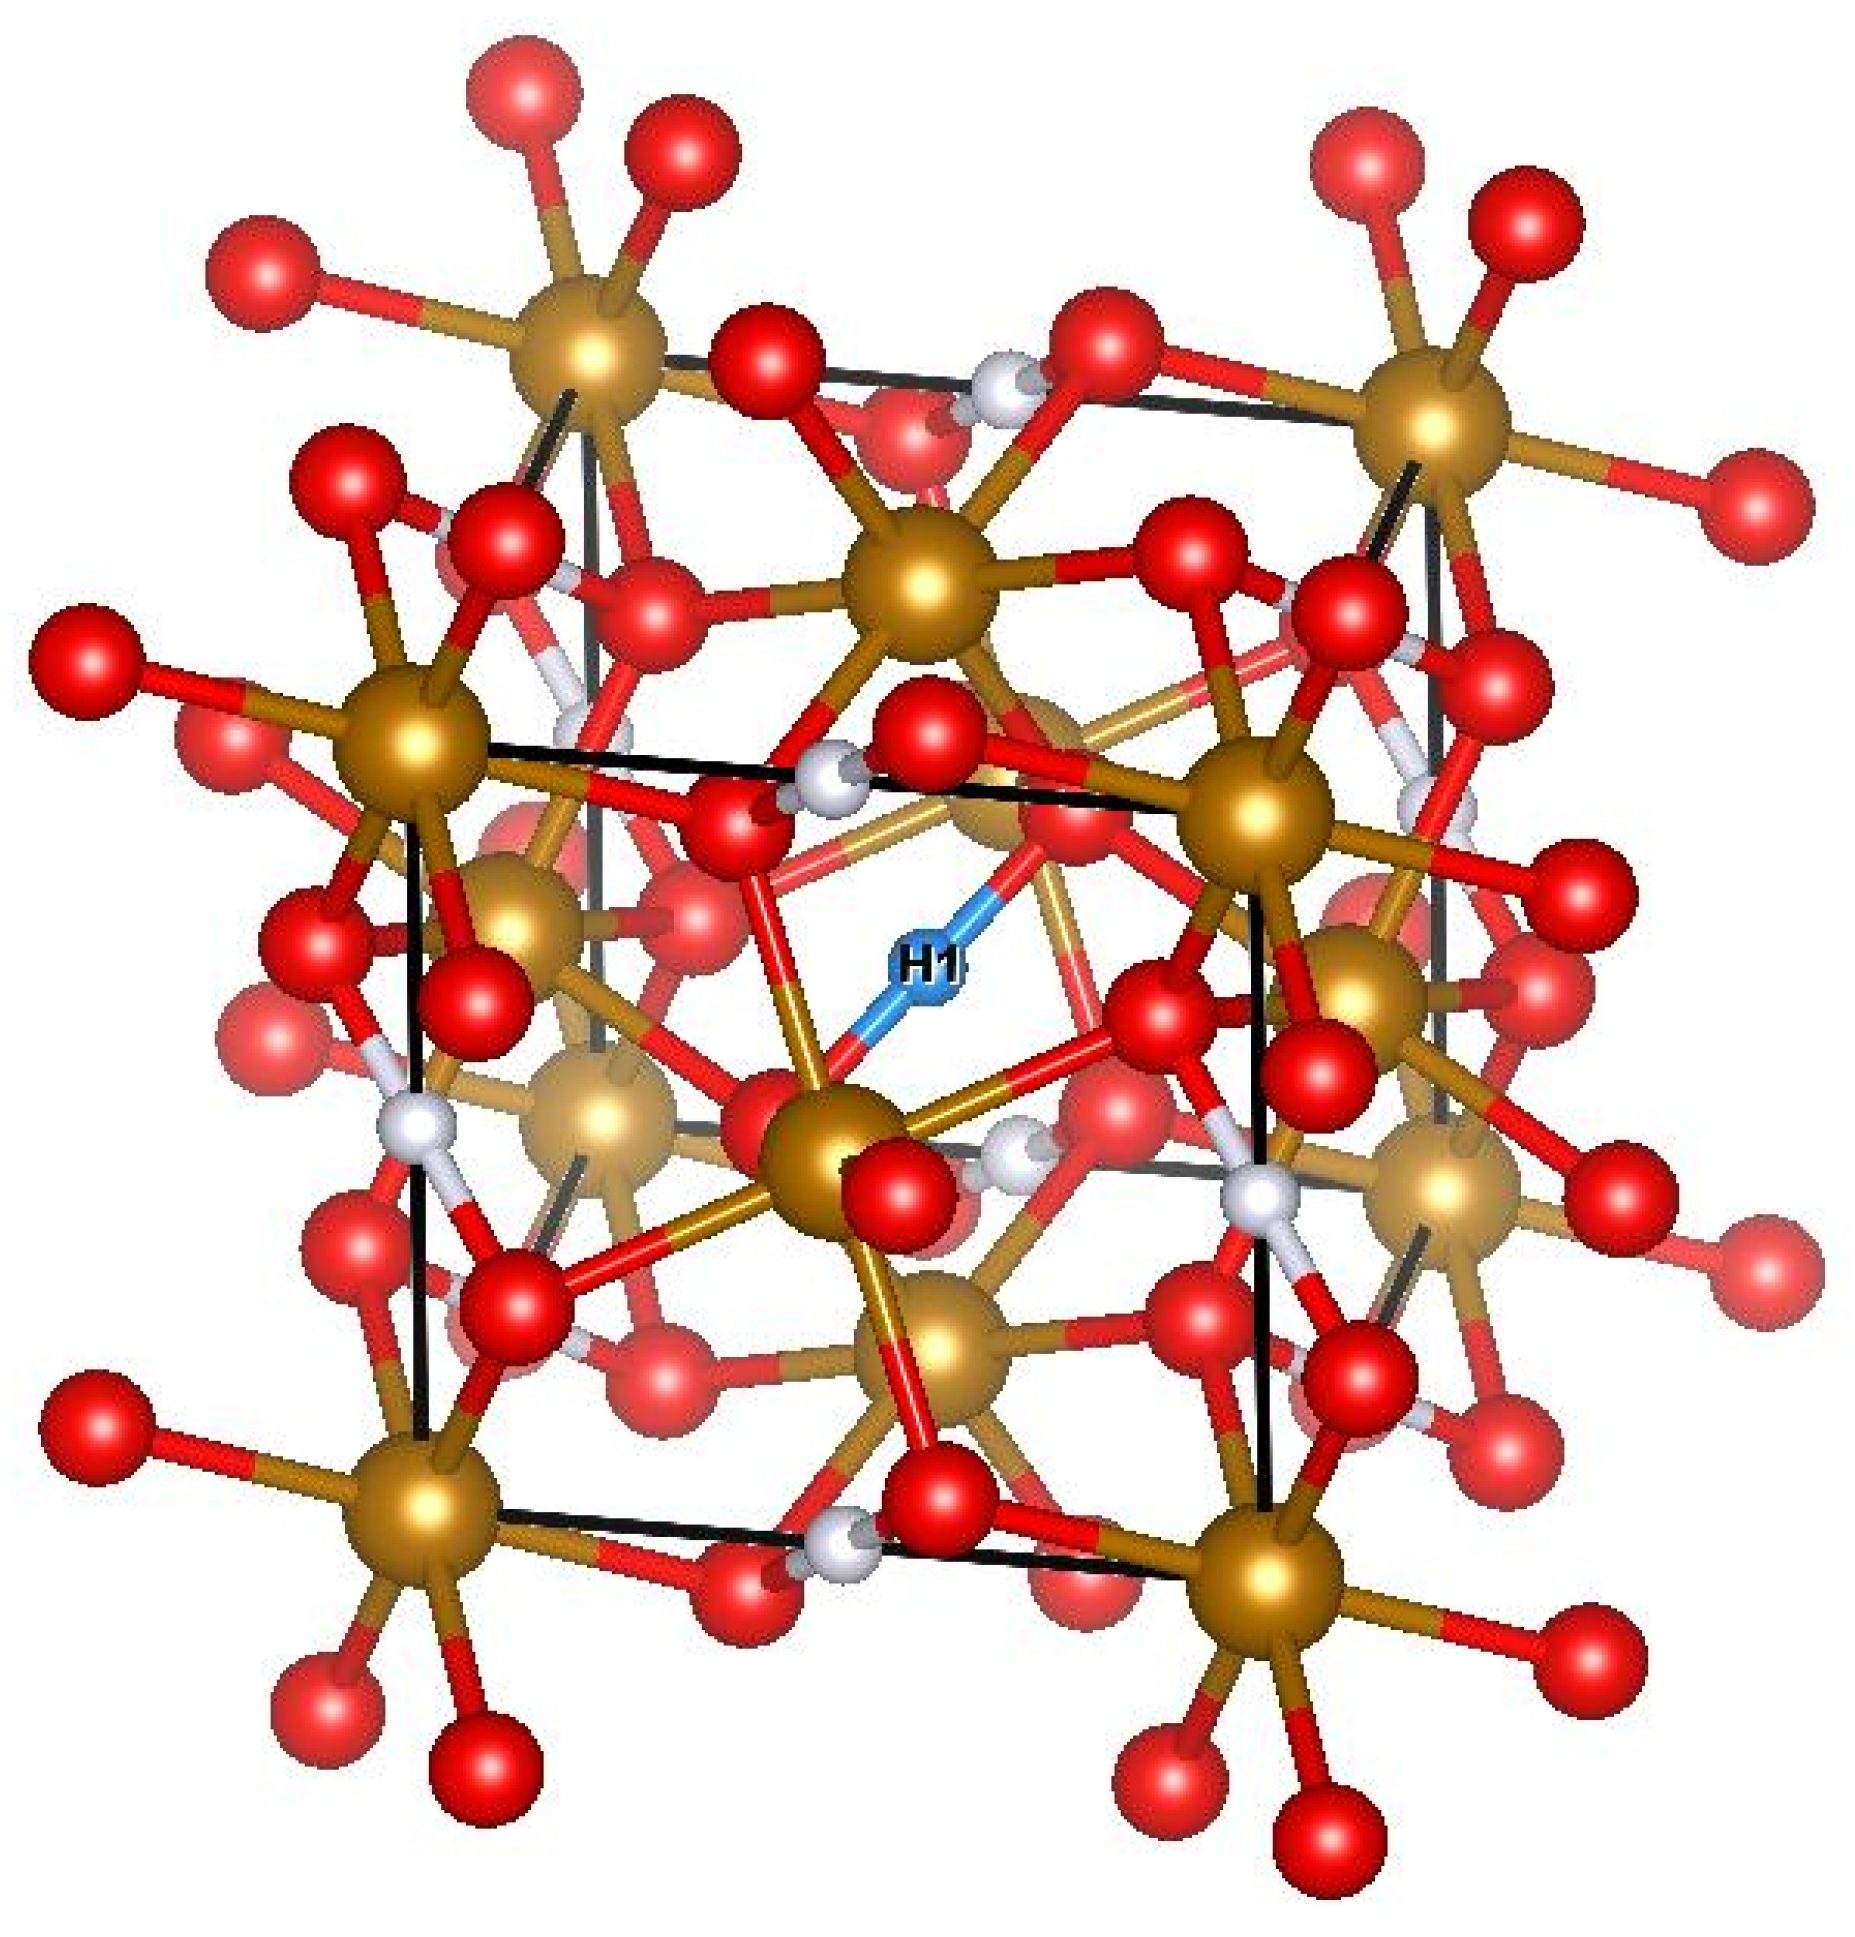 Molecules | Free Full-Text | Influence of Molecular Orbitals on Magnetic  Properties of FeO2Hx